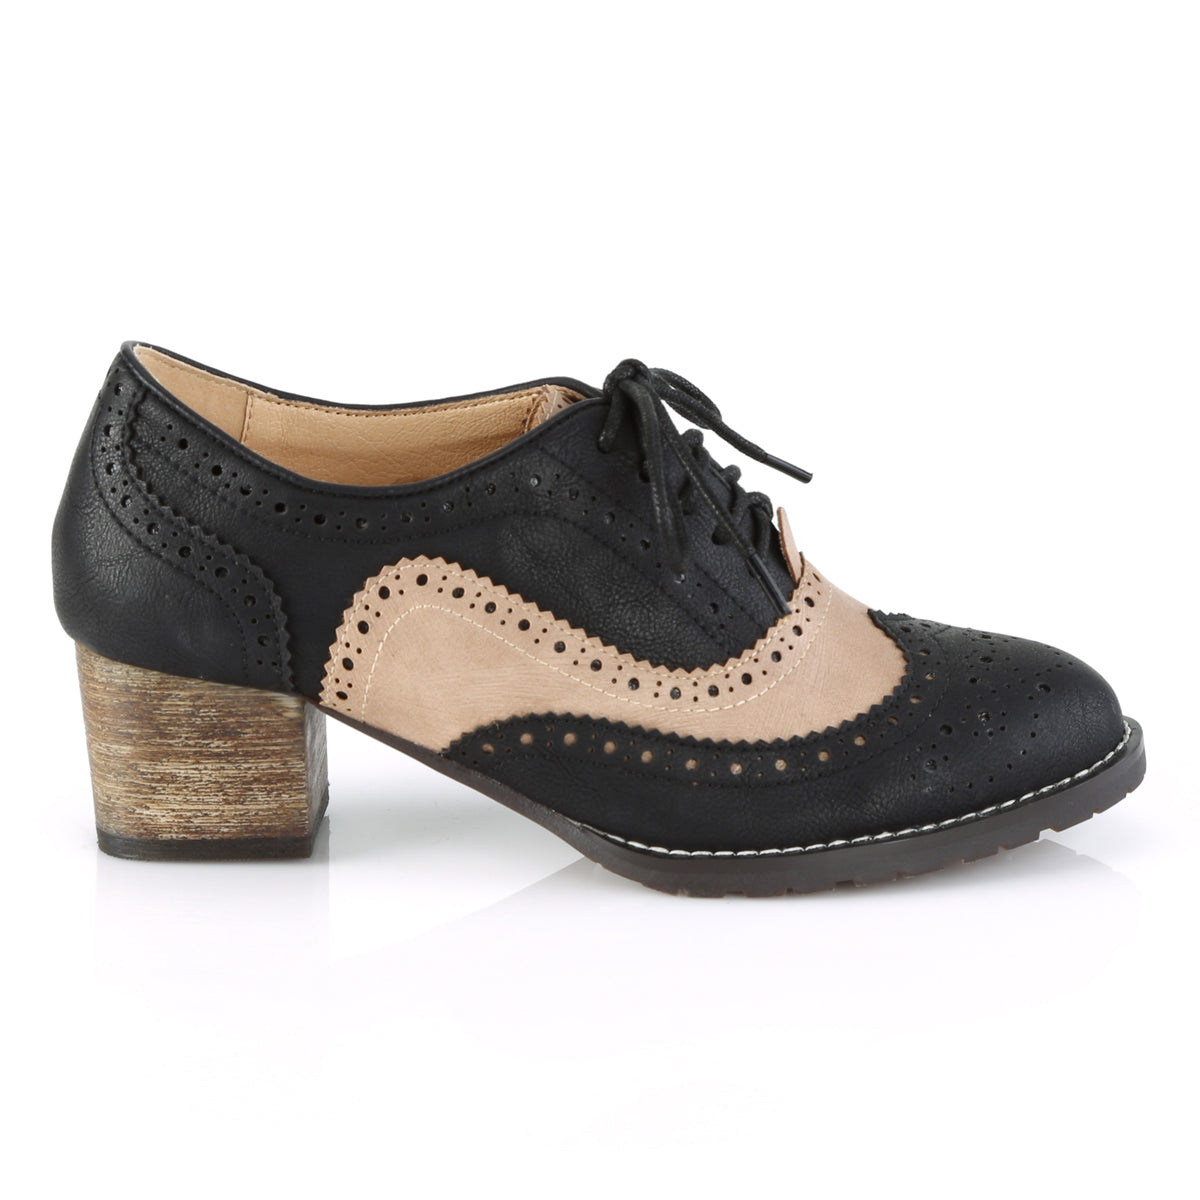 RUSSELL-34 Pin Up Couture Black-Tan Faux Leather Single Soles [Retro Glamour Shoes]